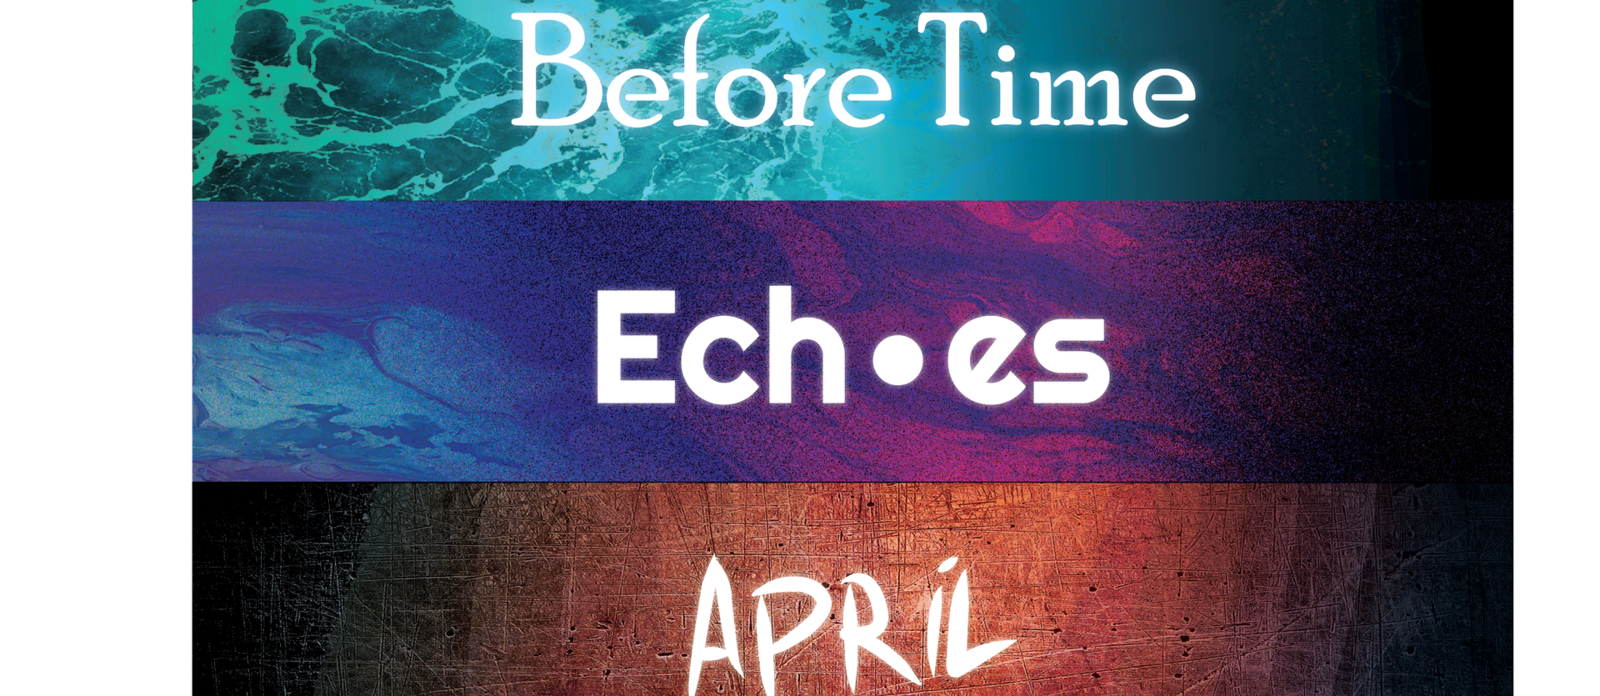 Koncert: Before Time, Echoes, April